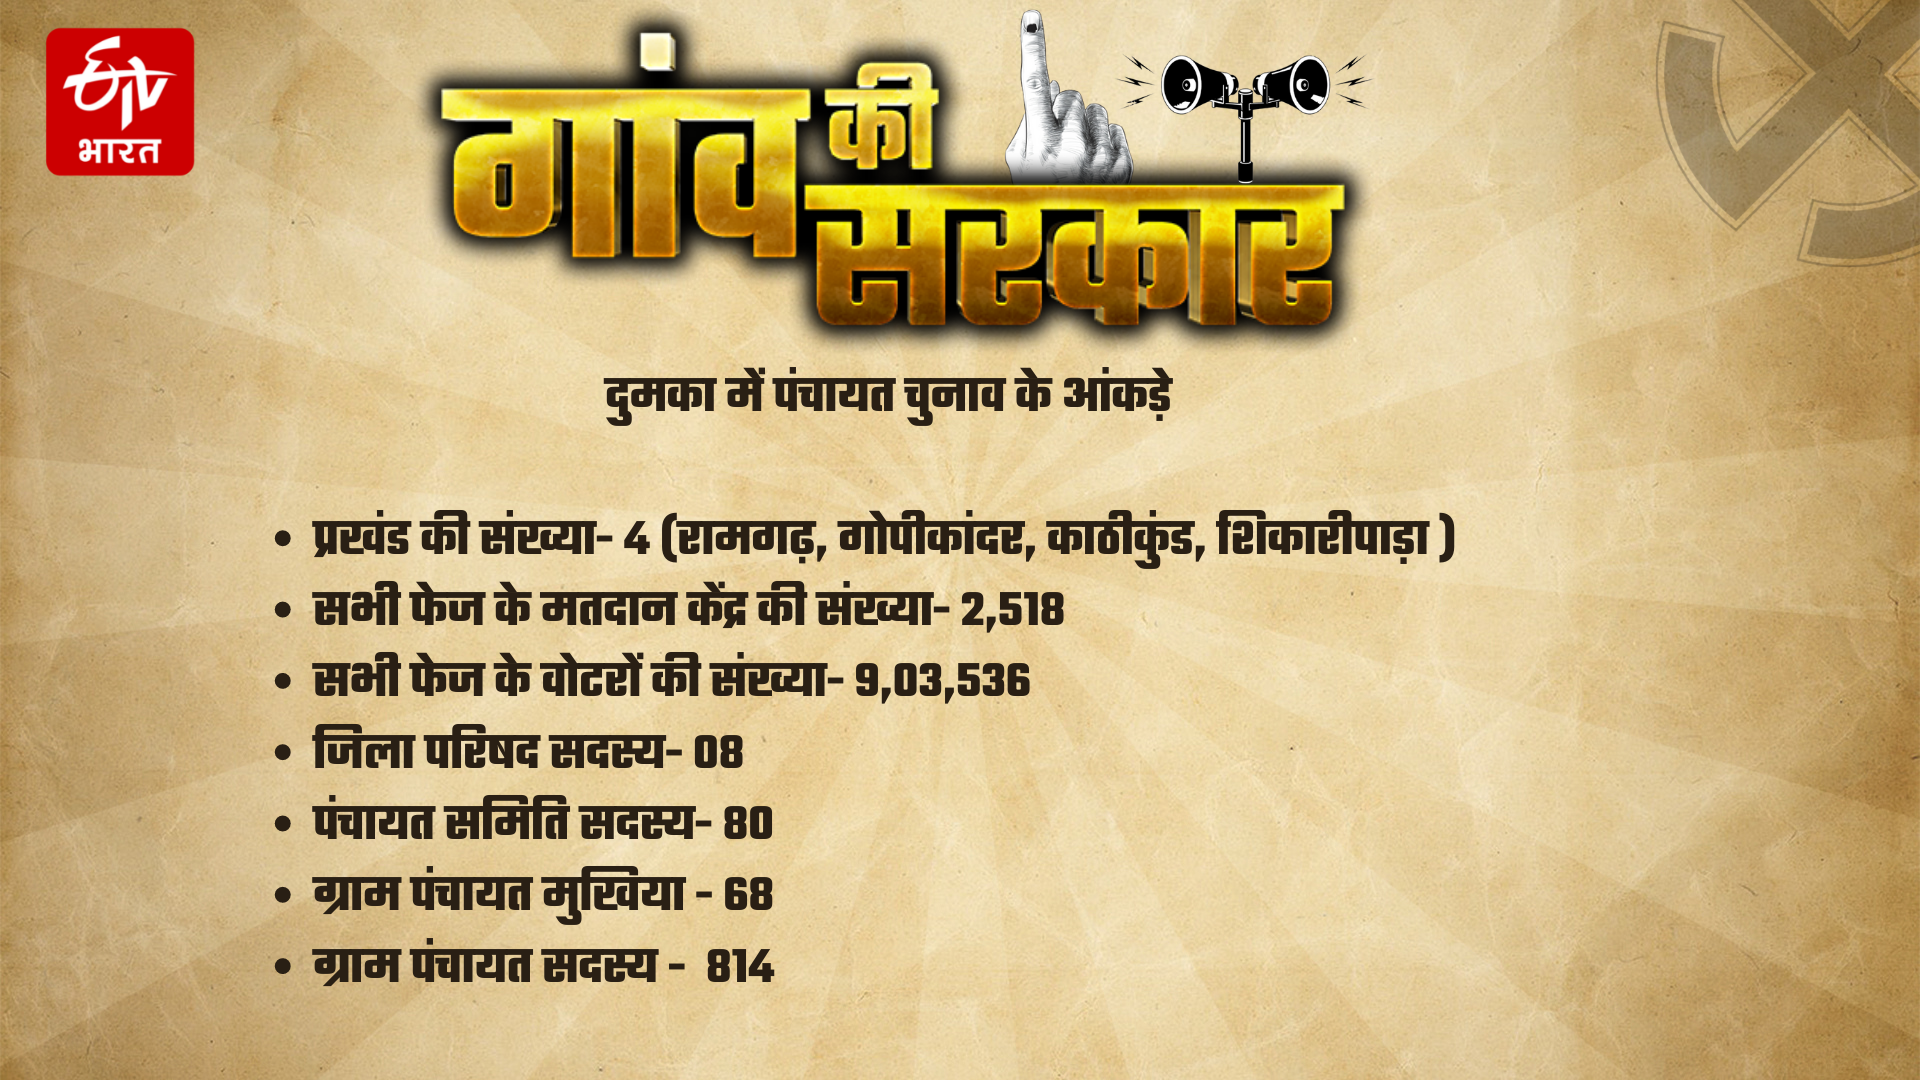 Know what the figures of Panchayat elections